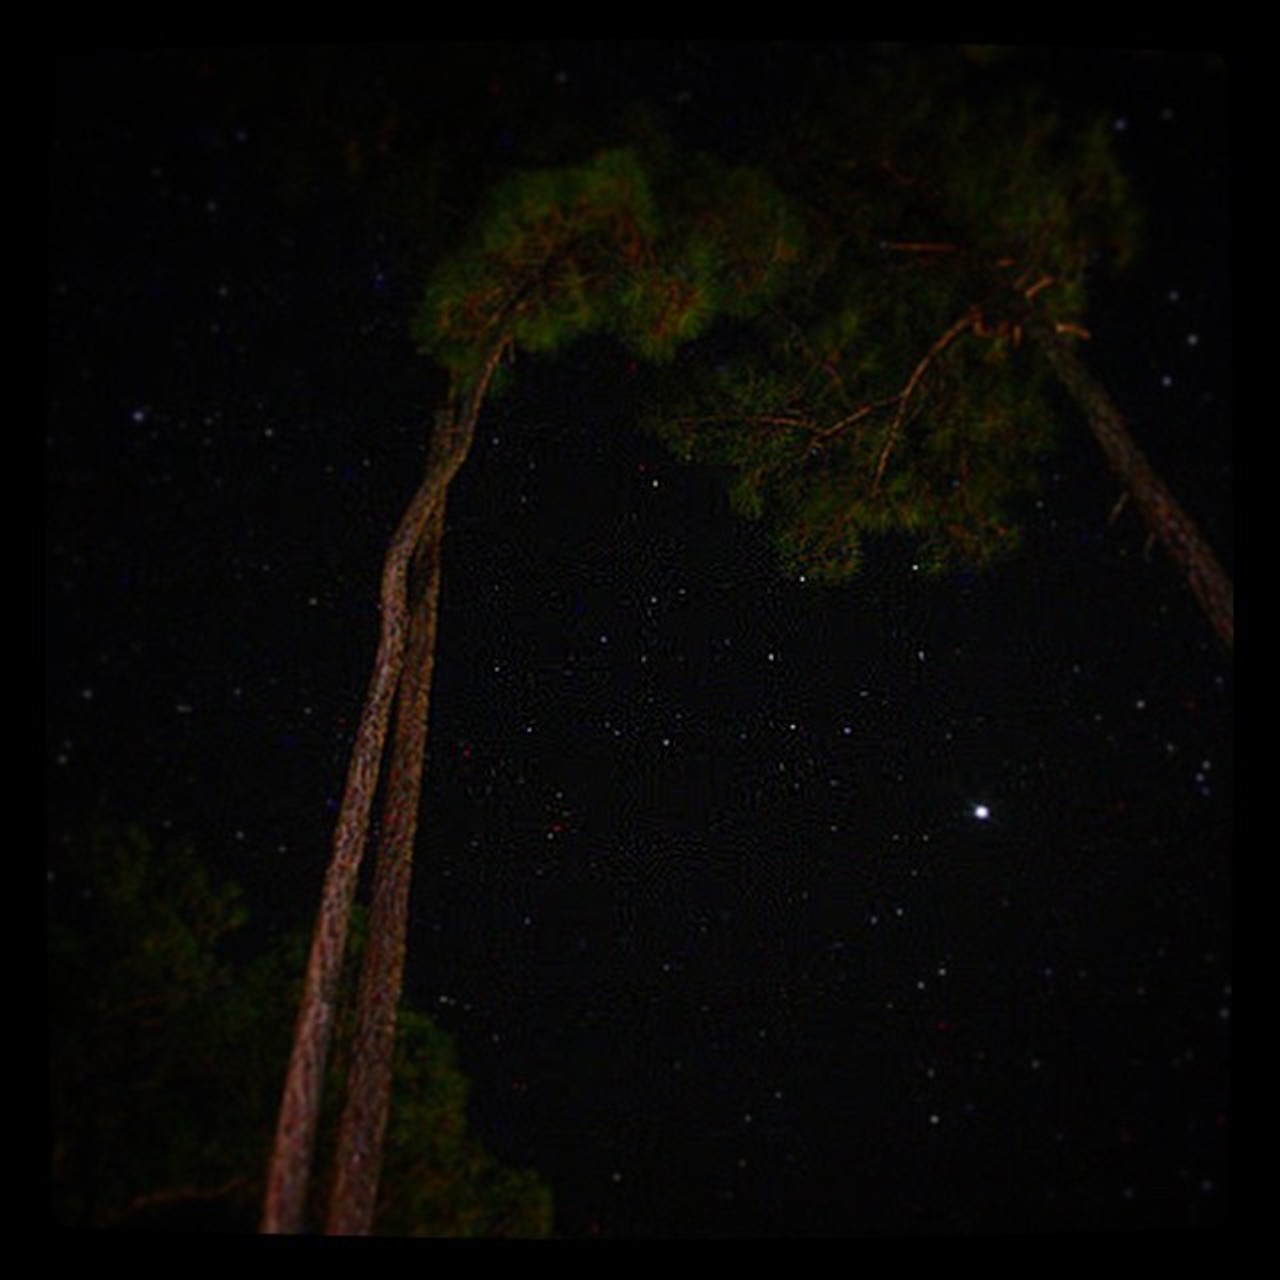 Winter is also stargazing season in Florida
Since there's typically less cloud cover in the winter, Florida's night skies are currently shining a little brighter. If you want to step it up a notch, UCF has an observatory that is often open to the public. Check their schedule for details. 
Pic via free220 on Instagram